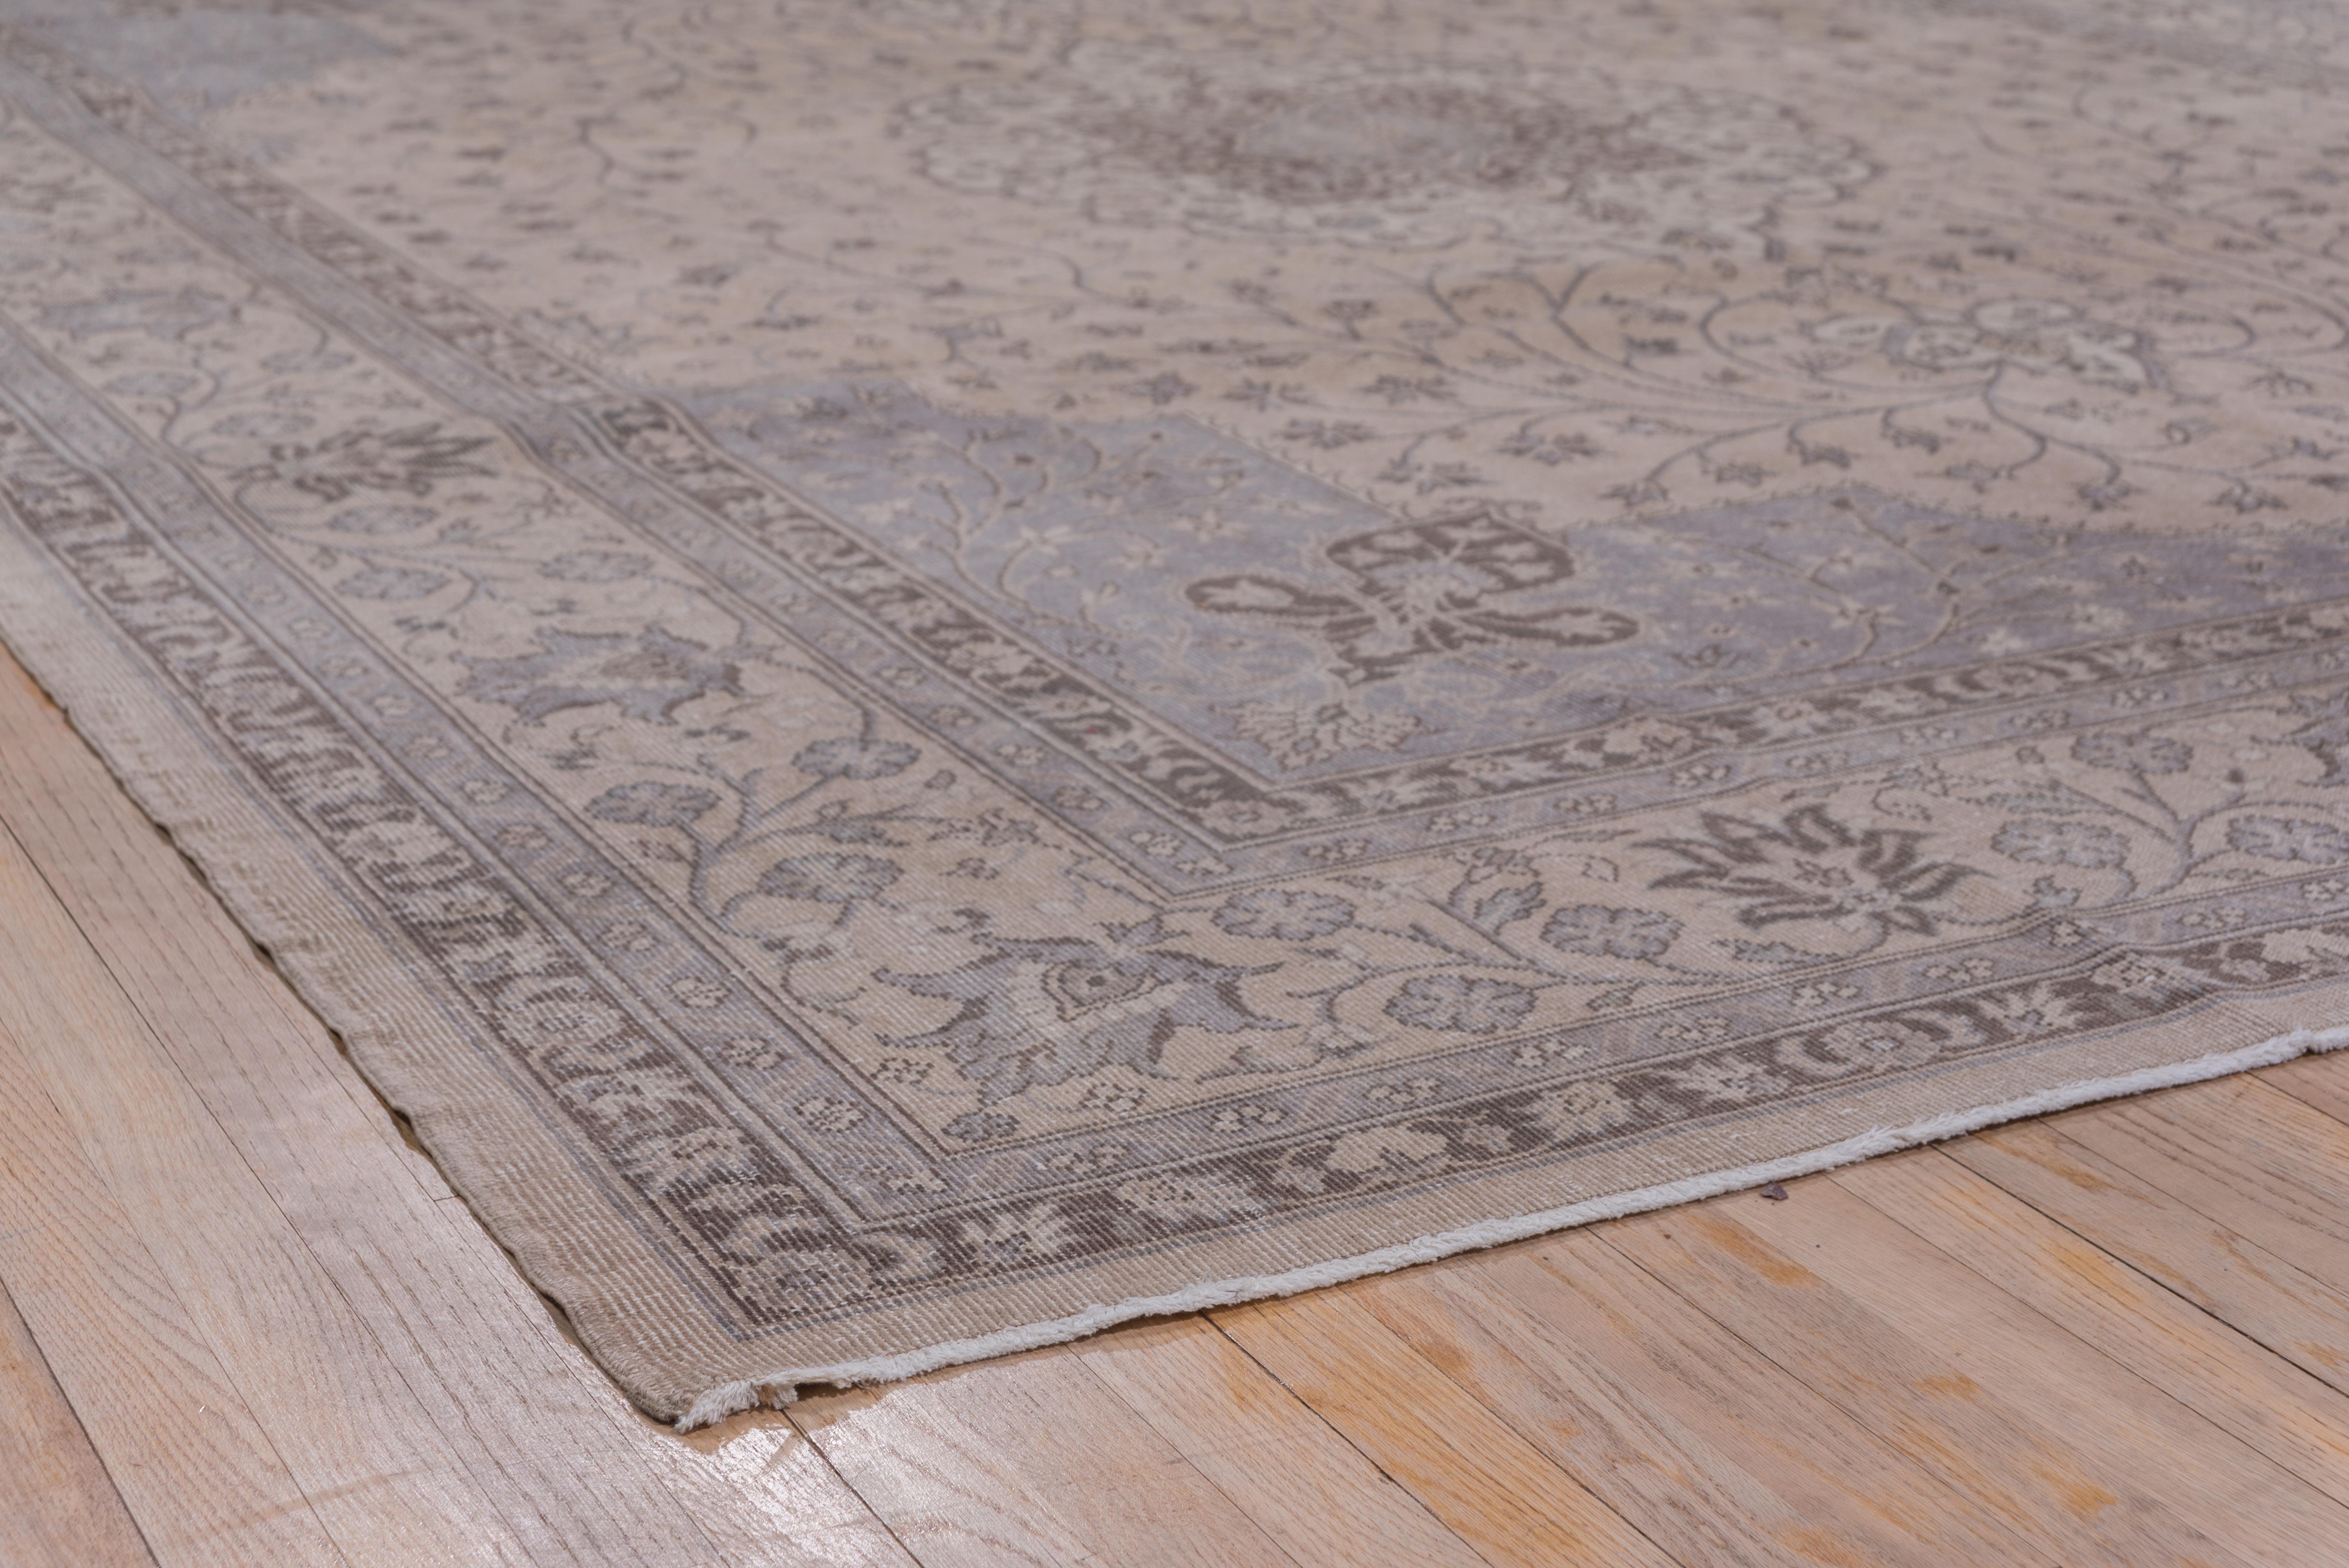 In the Tabriz manner, with a light brown and taupe field centered by a lightly scalloped ecru medallion, and an inner actograms Sub-medallion and elegantly flowing floriated stems. Blue gray extended corners. Main border of finely drawn reversing